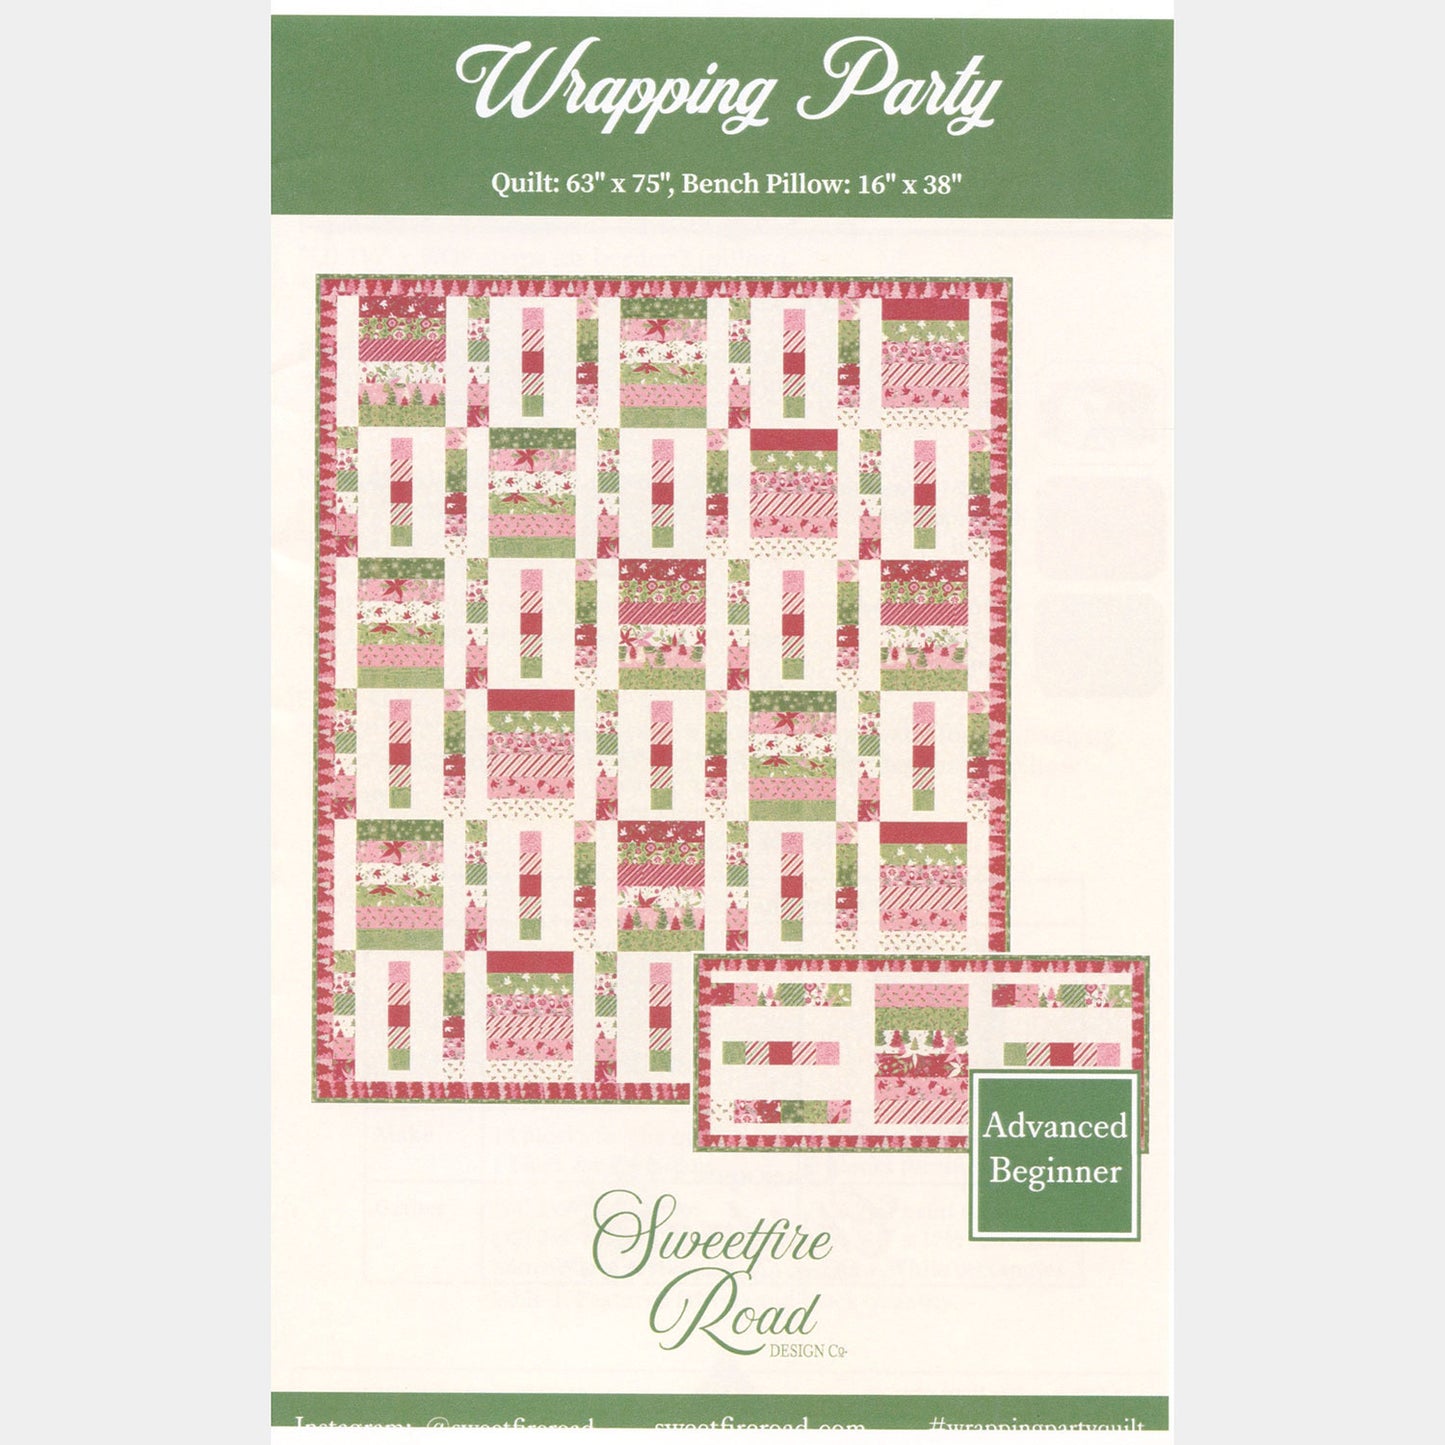 Wrapping Party Quilt & Table Runner Pattern Primary Image